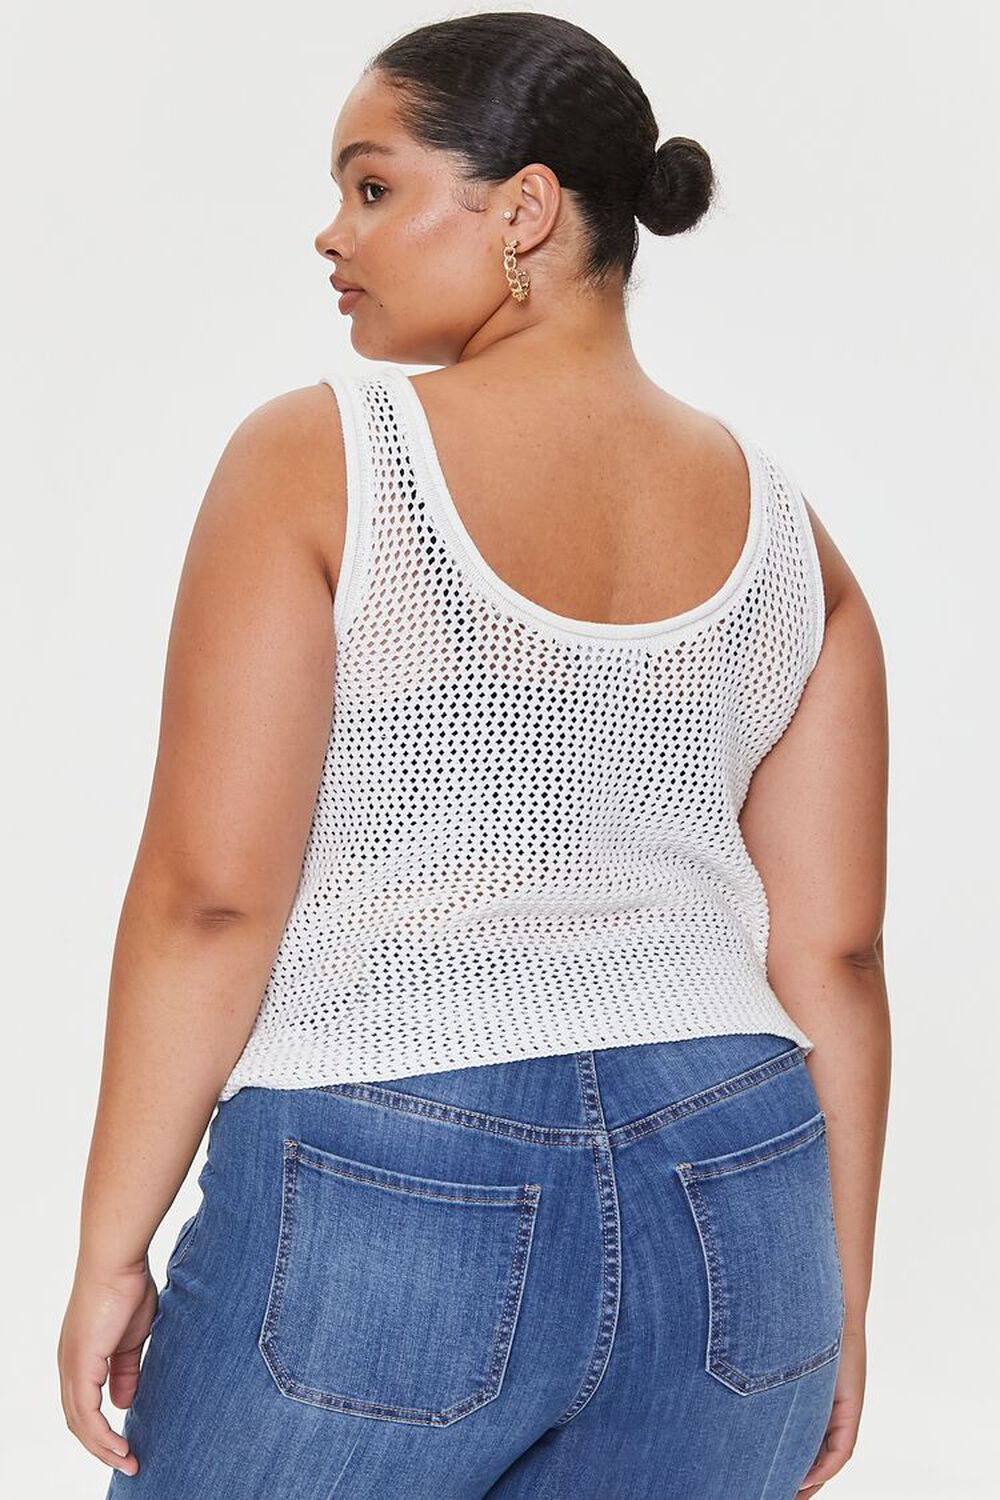 Plus Size Netted Tank Top, image 3